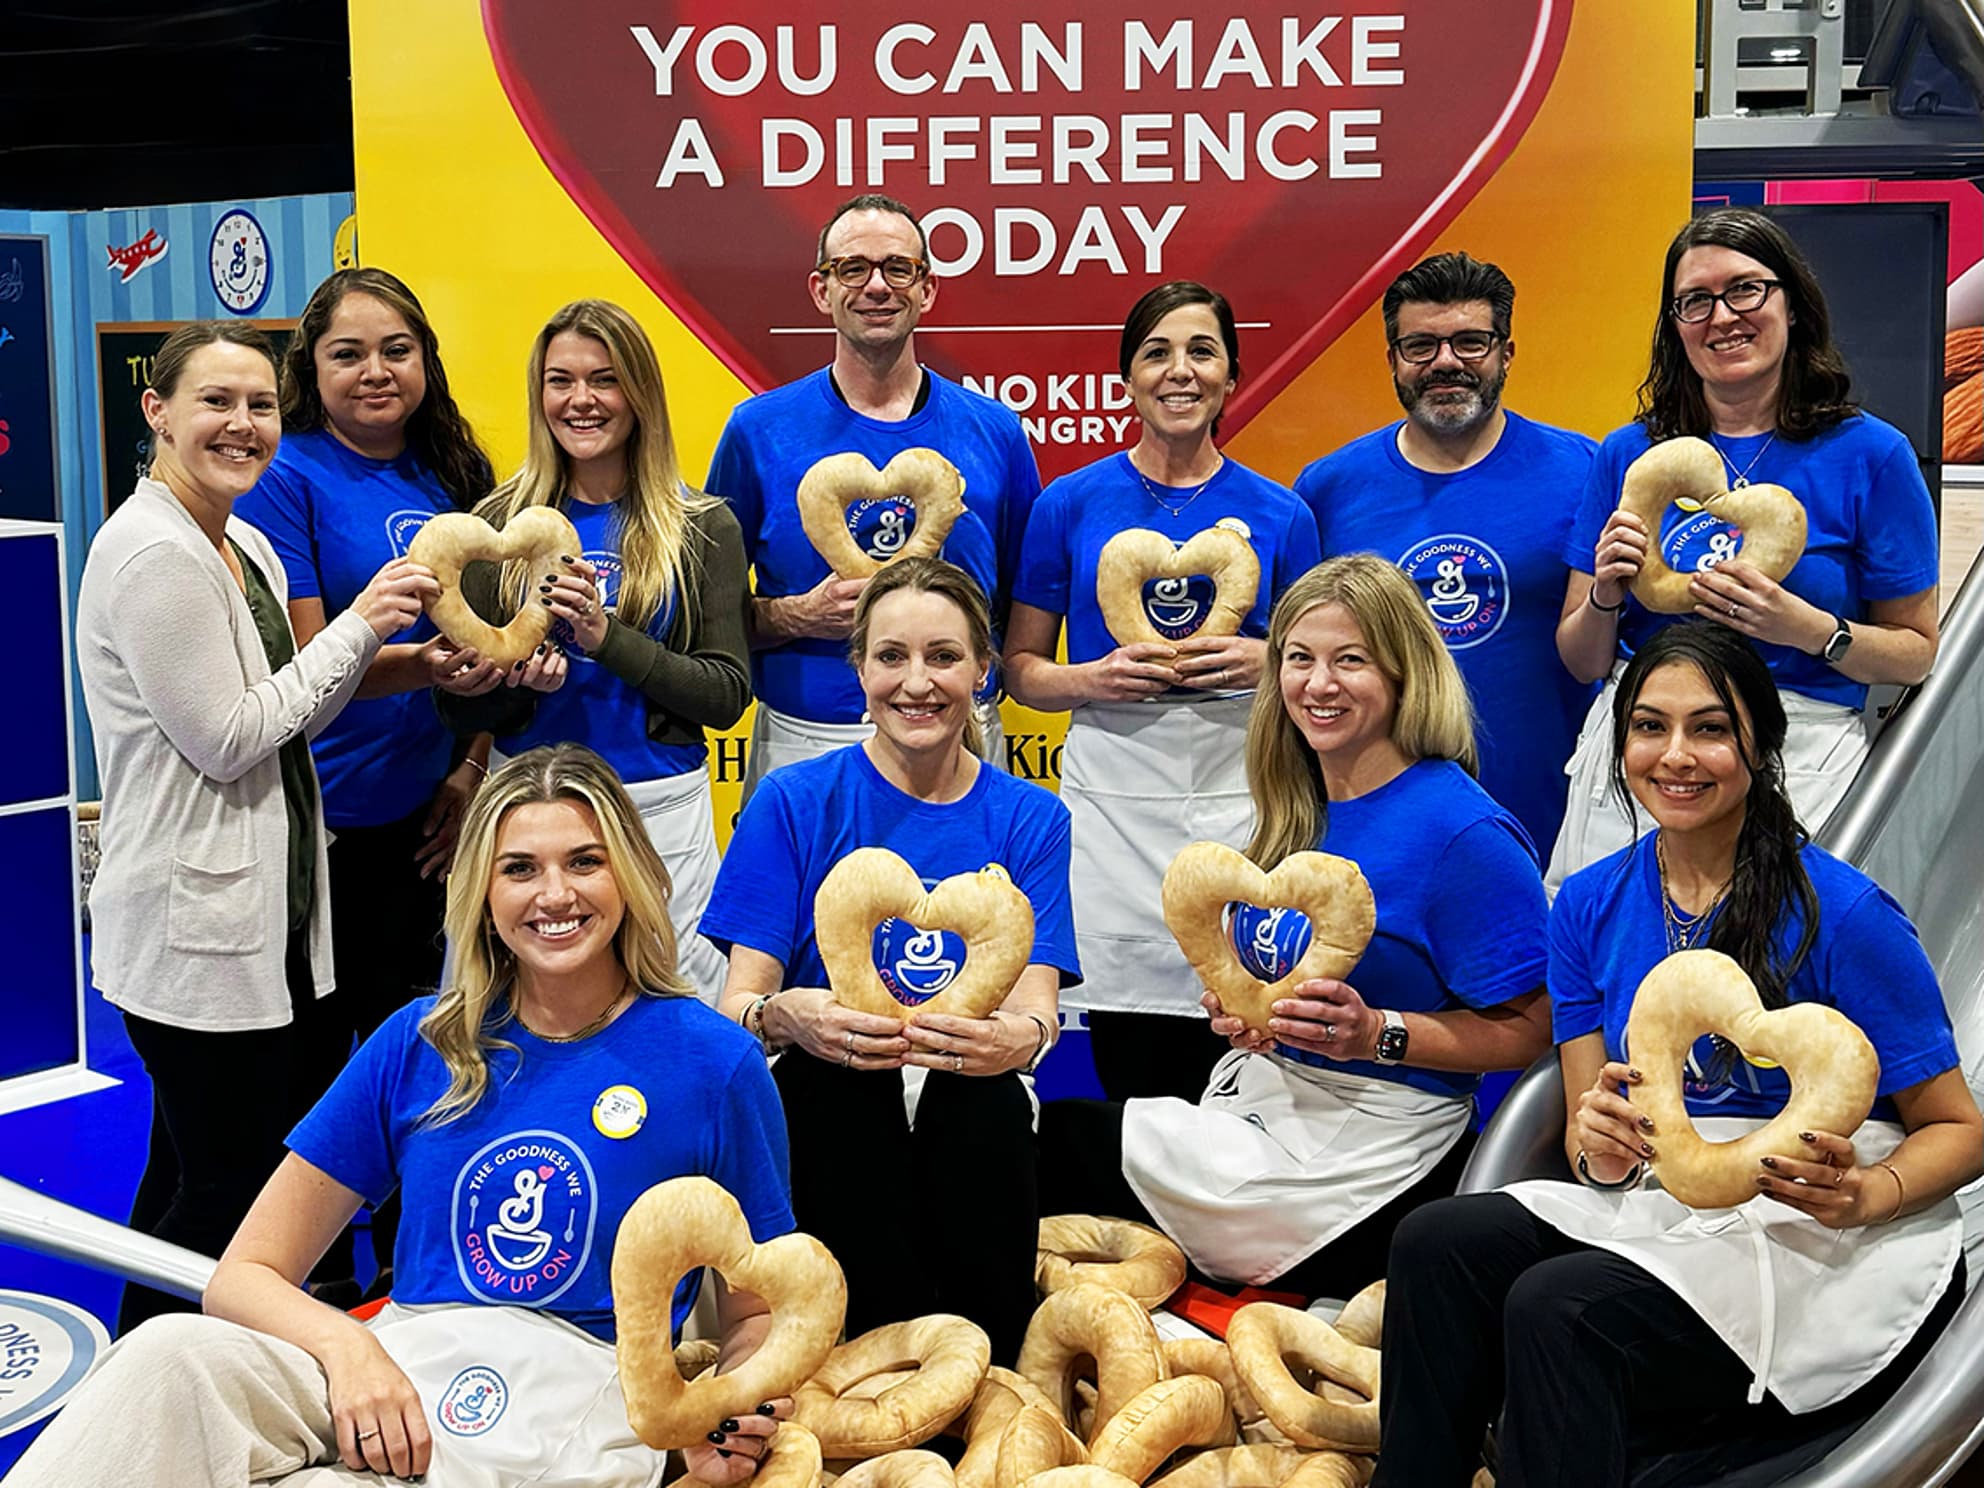 employees holding heart-shaped cheerios